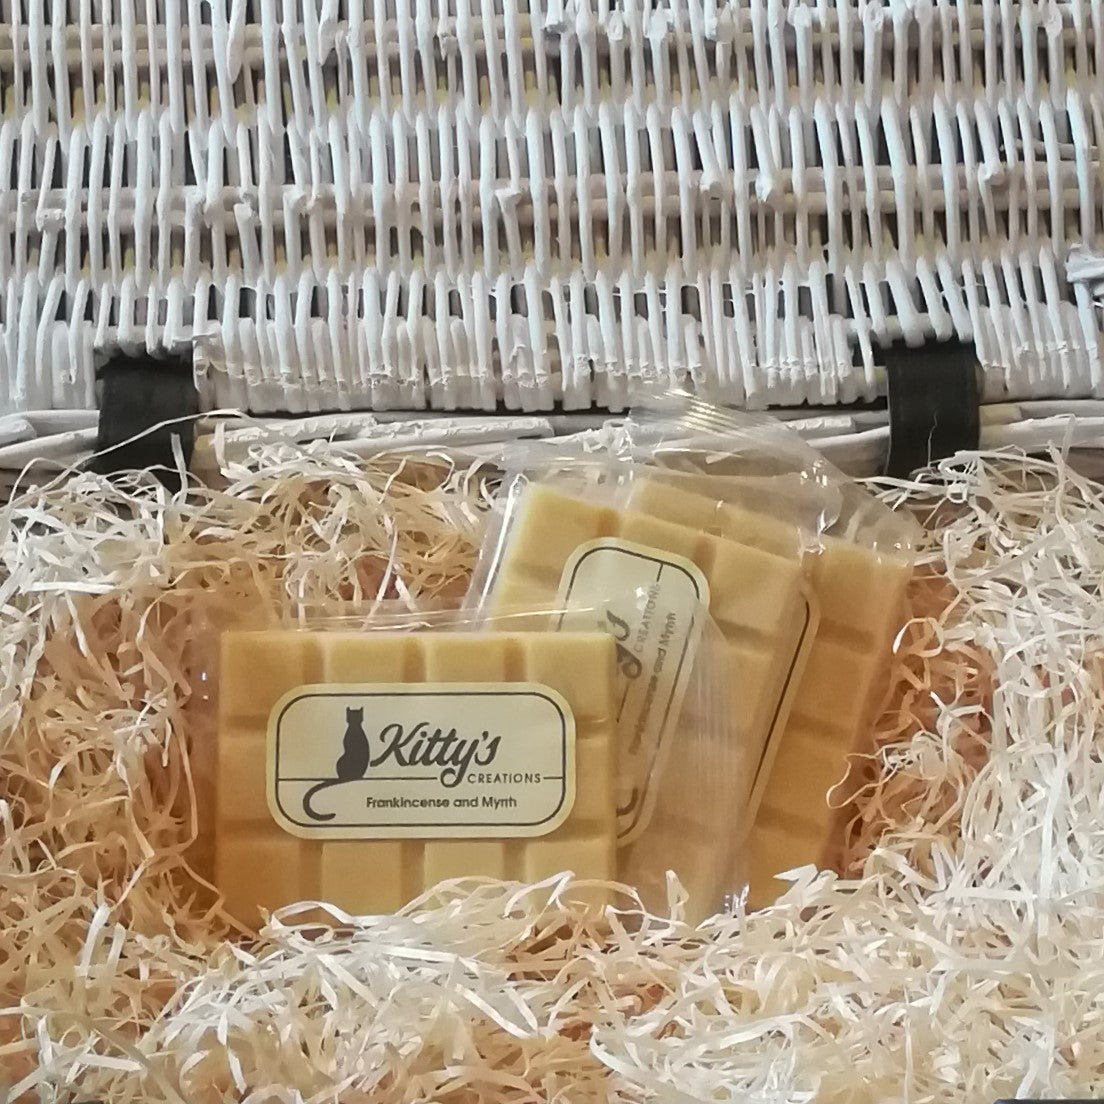 Three hand-made rectangular Wax Melts, each a rich and warming amber yellow, nestled in a basket of straw. Frankincense, cedar wood, amber, myrrh and jasmine combined together to give you a fragrance from lands afar. This timeless aroma is warming and comforting, calming and complex, delighting you and making you glad to be home.